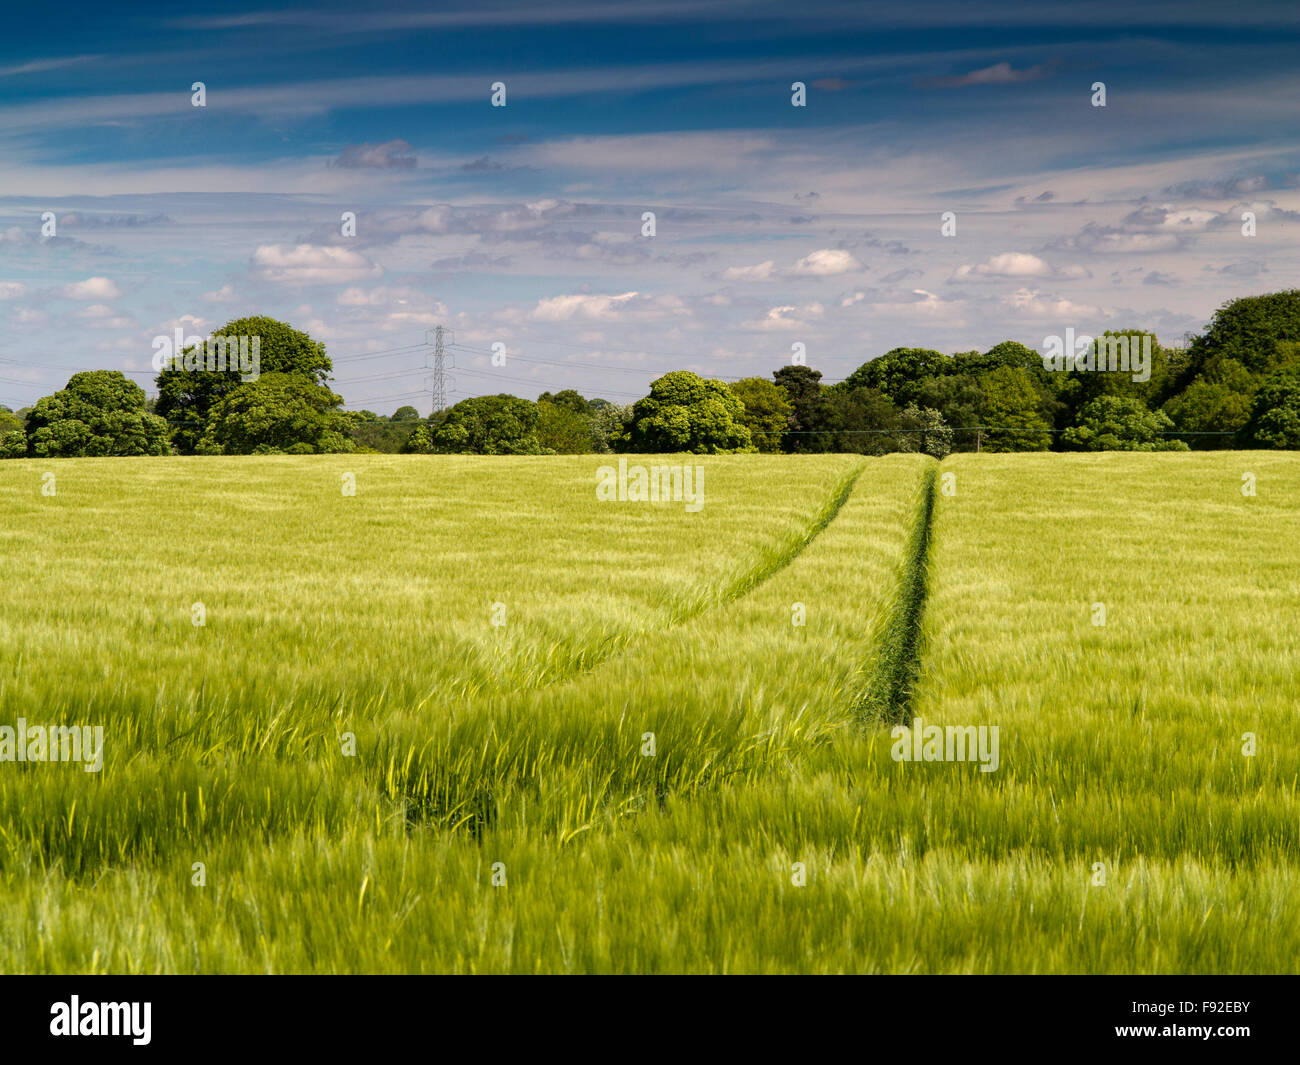 UK, England, Cheshire, Gawsworth, agriculture, field of barley Stock Photo